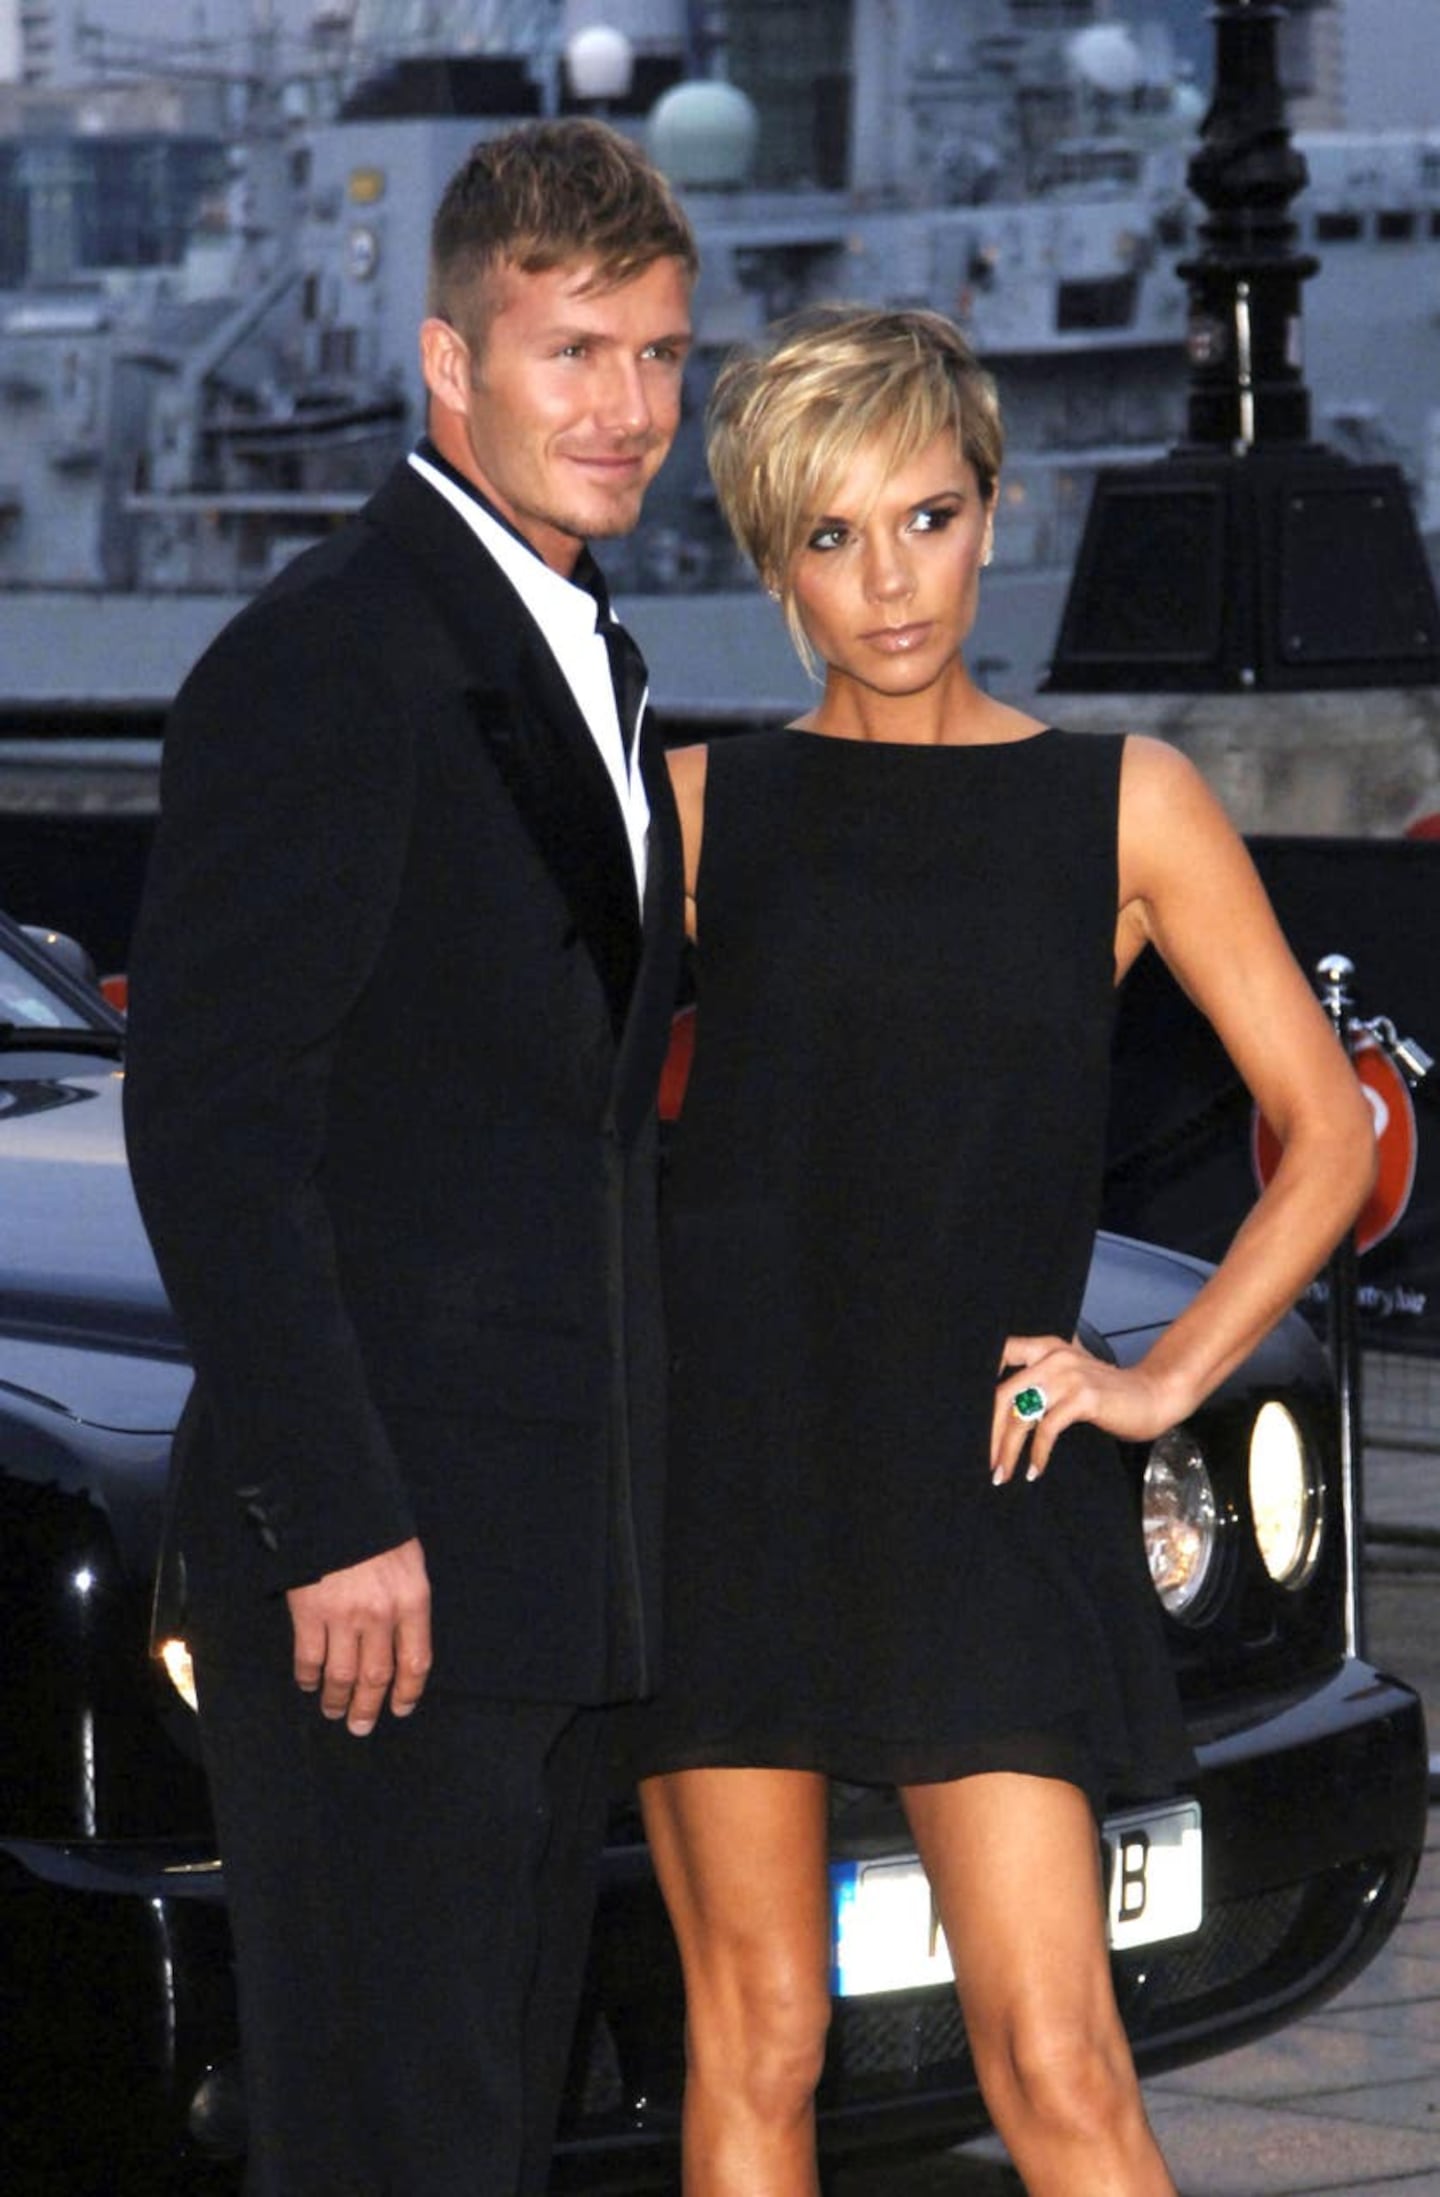 Sartorial leaders: David and Victoria Beckham’s fashion over the years ...